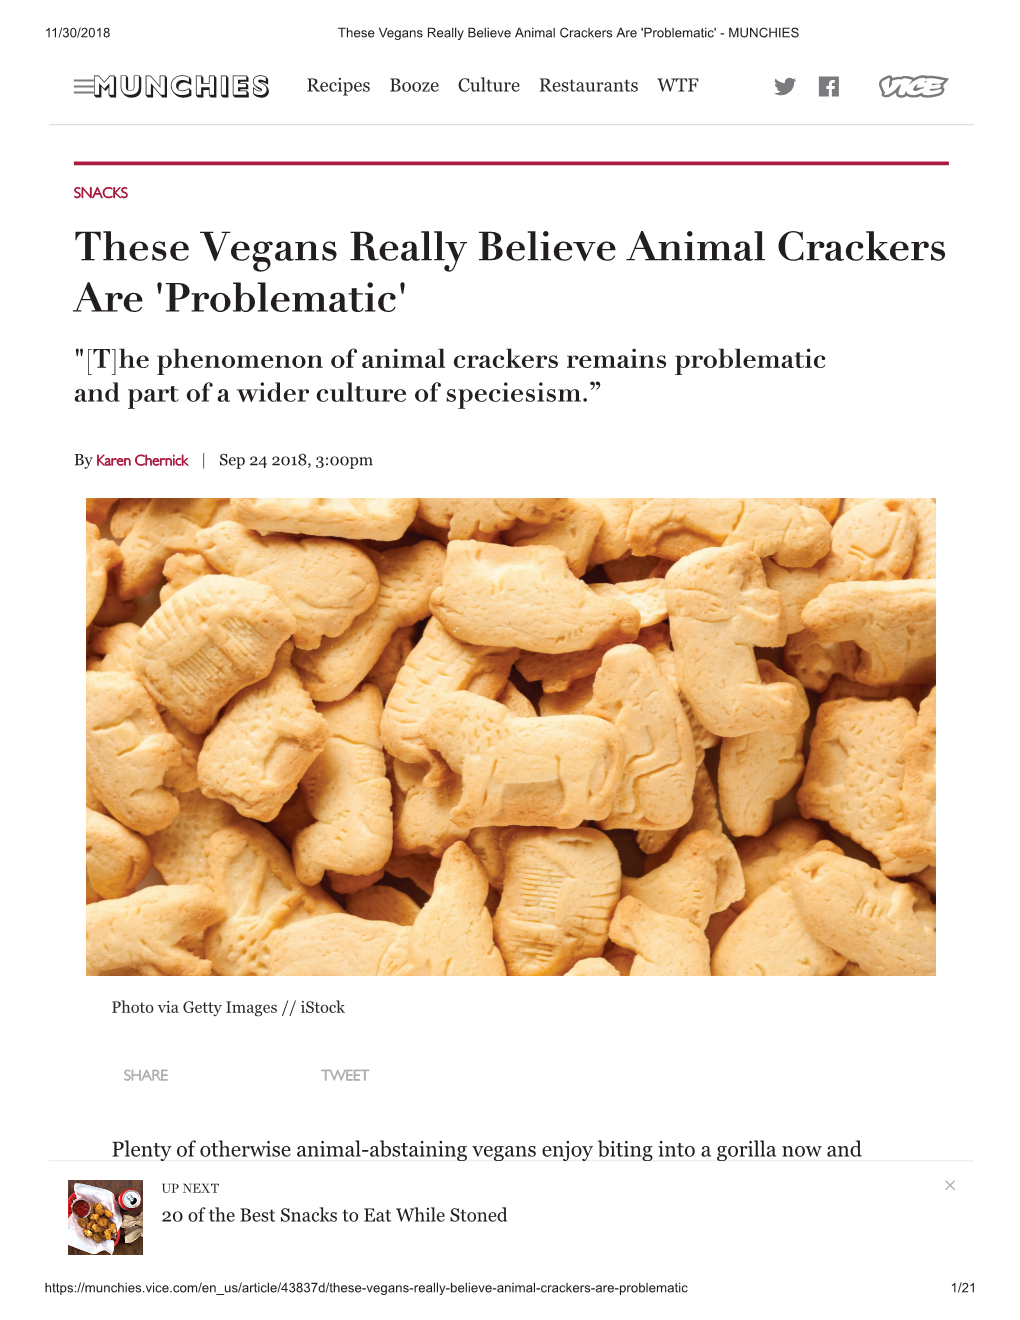 These Vegans Really Believe Animal Crackers Are 'Problematic' - MUNCHIES